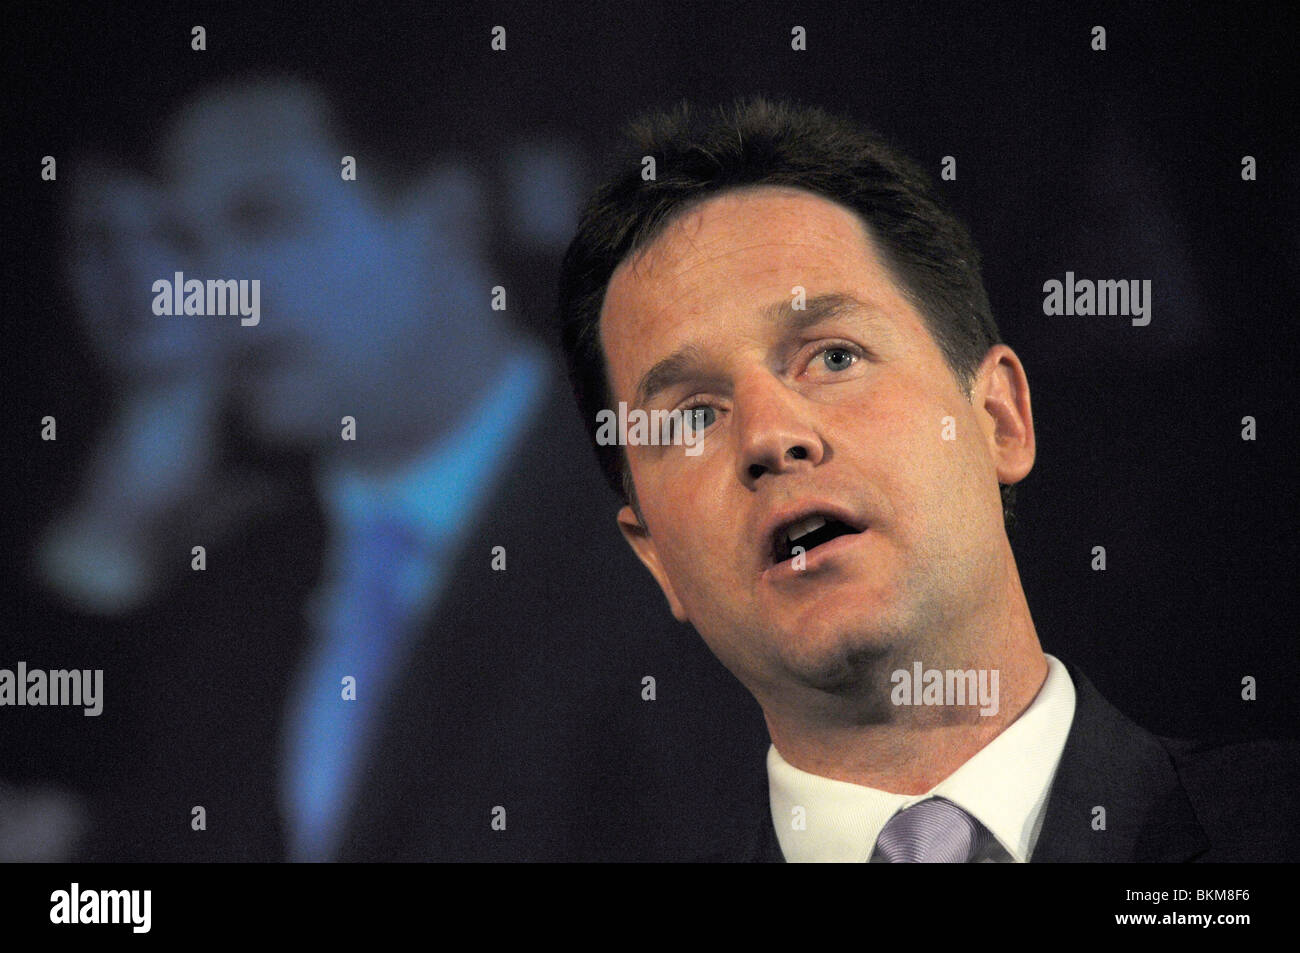 BRITISH DEPUTY PRIME MINISTER NICK CLEGG OF THE LIBERAL DEMOCRAT PARTY IN LONDON Stock Photo